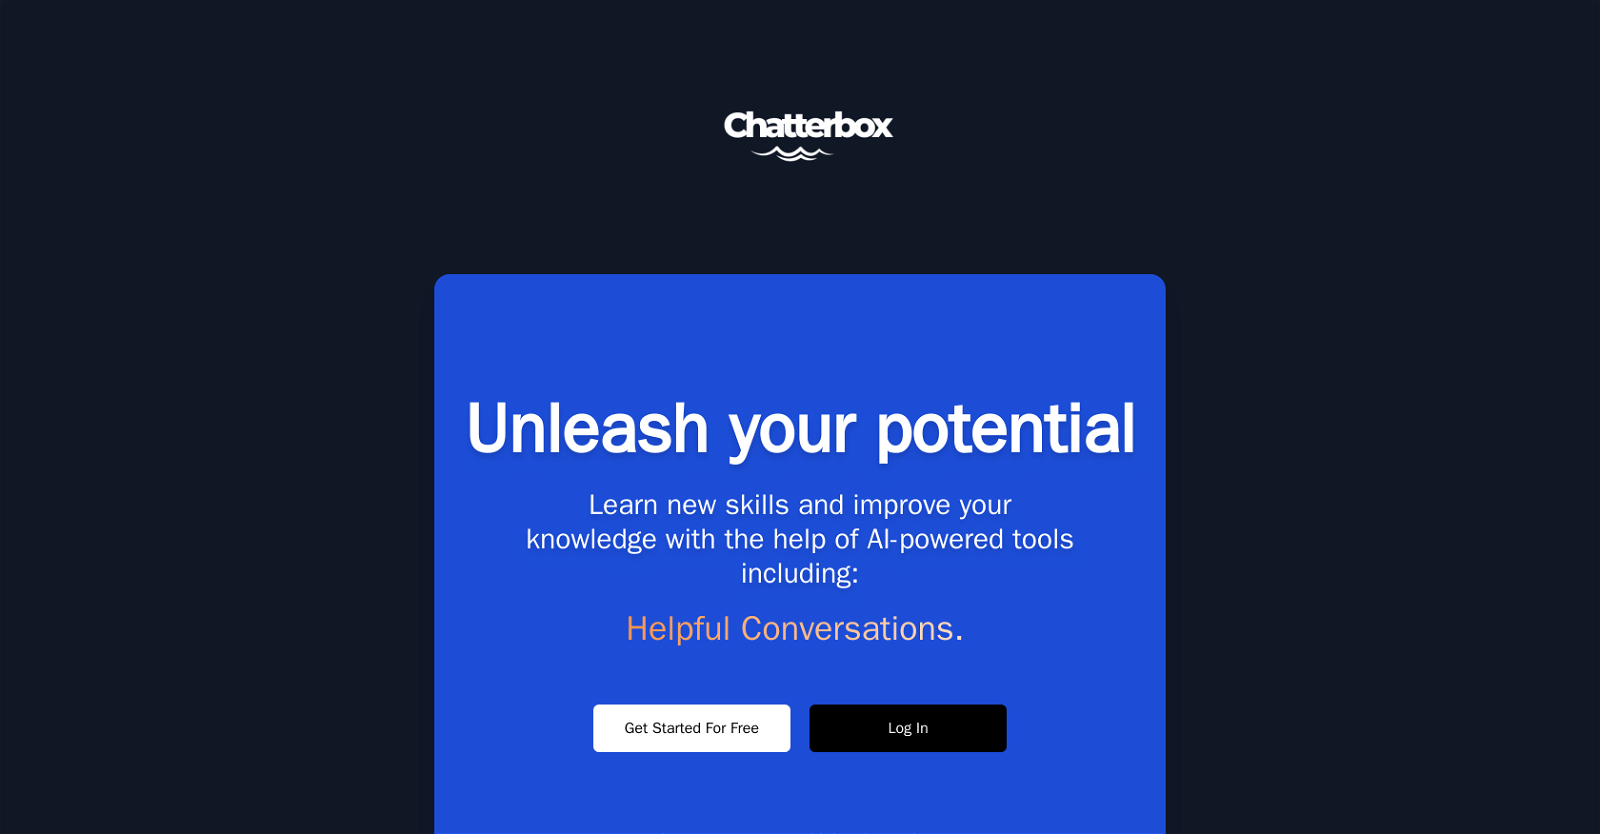 ChatterBox website